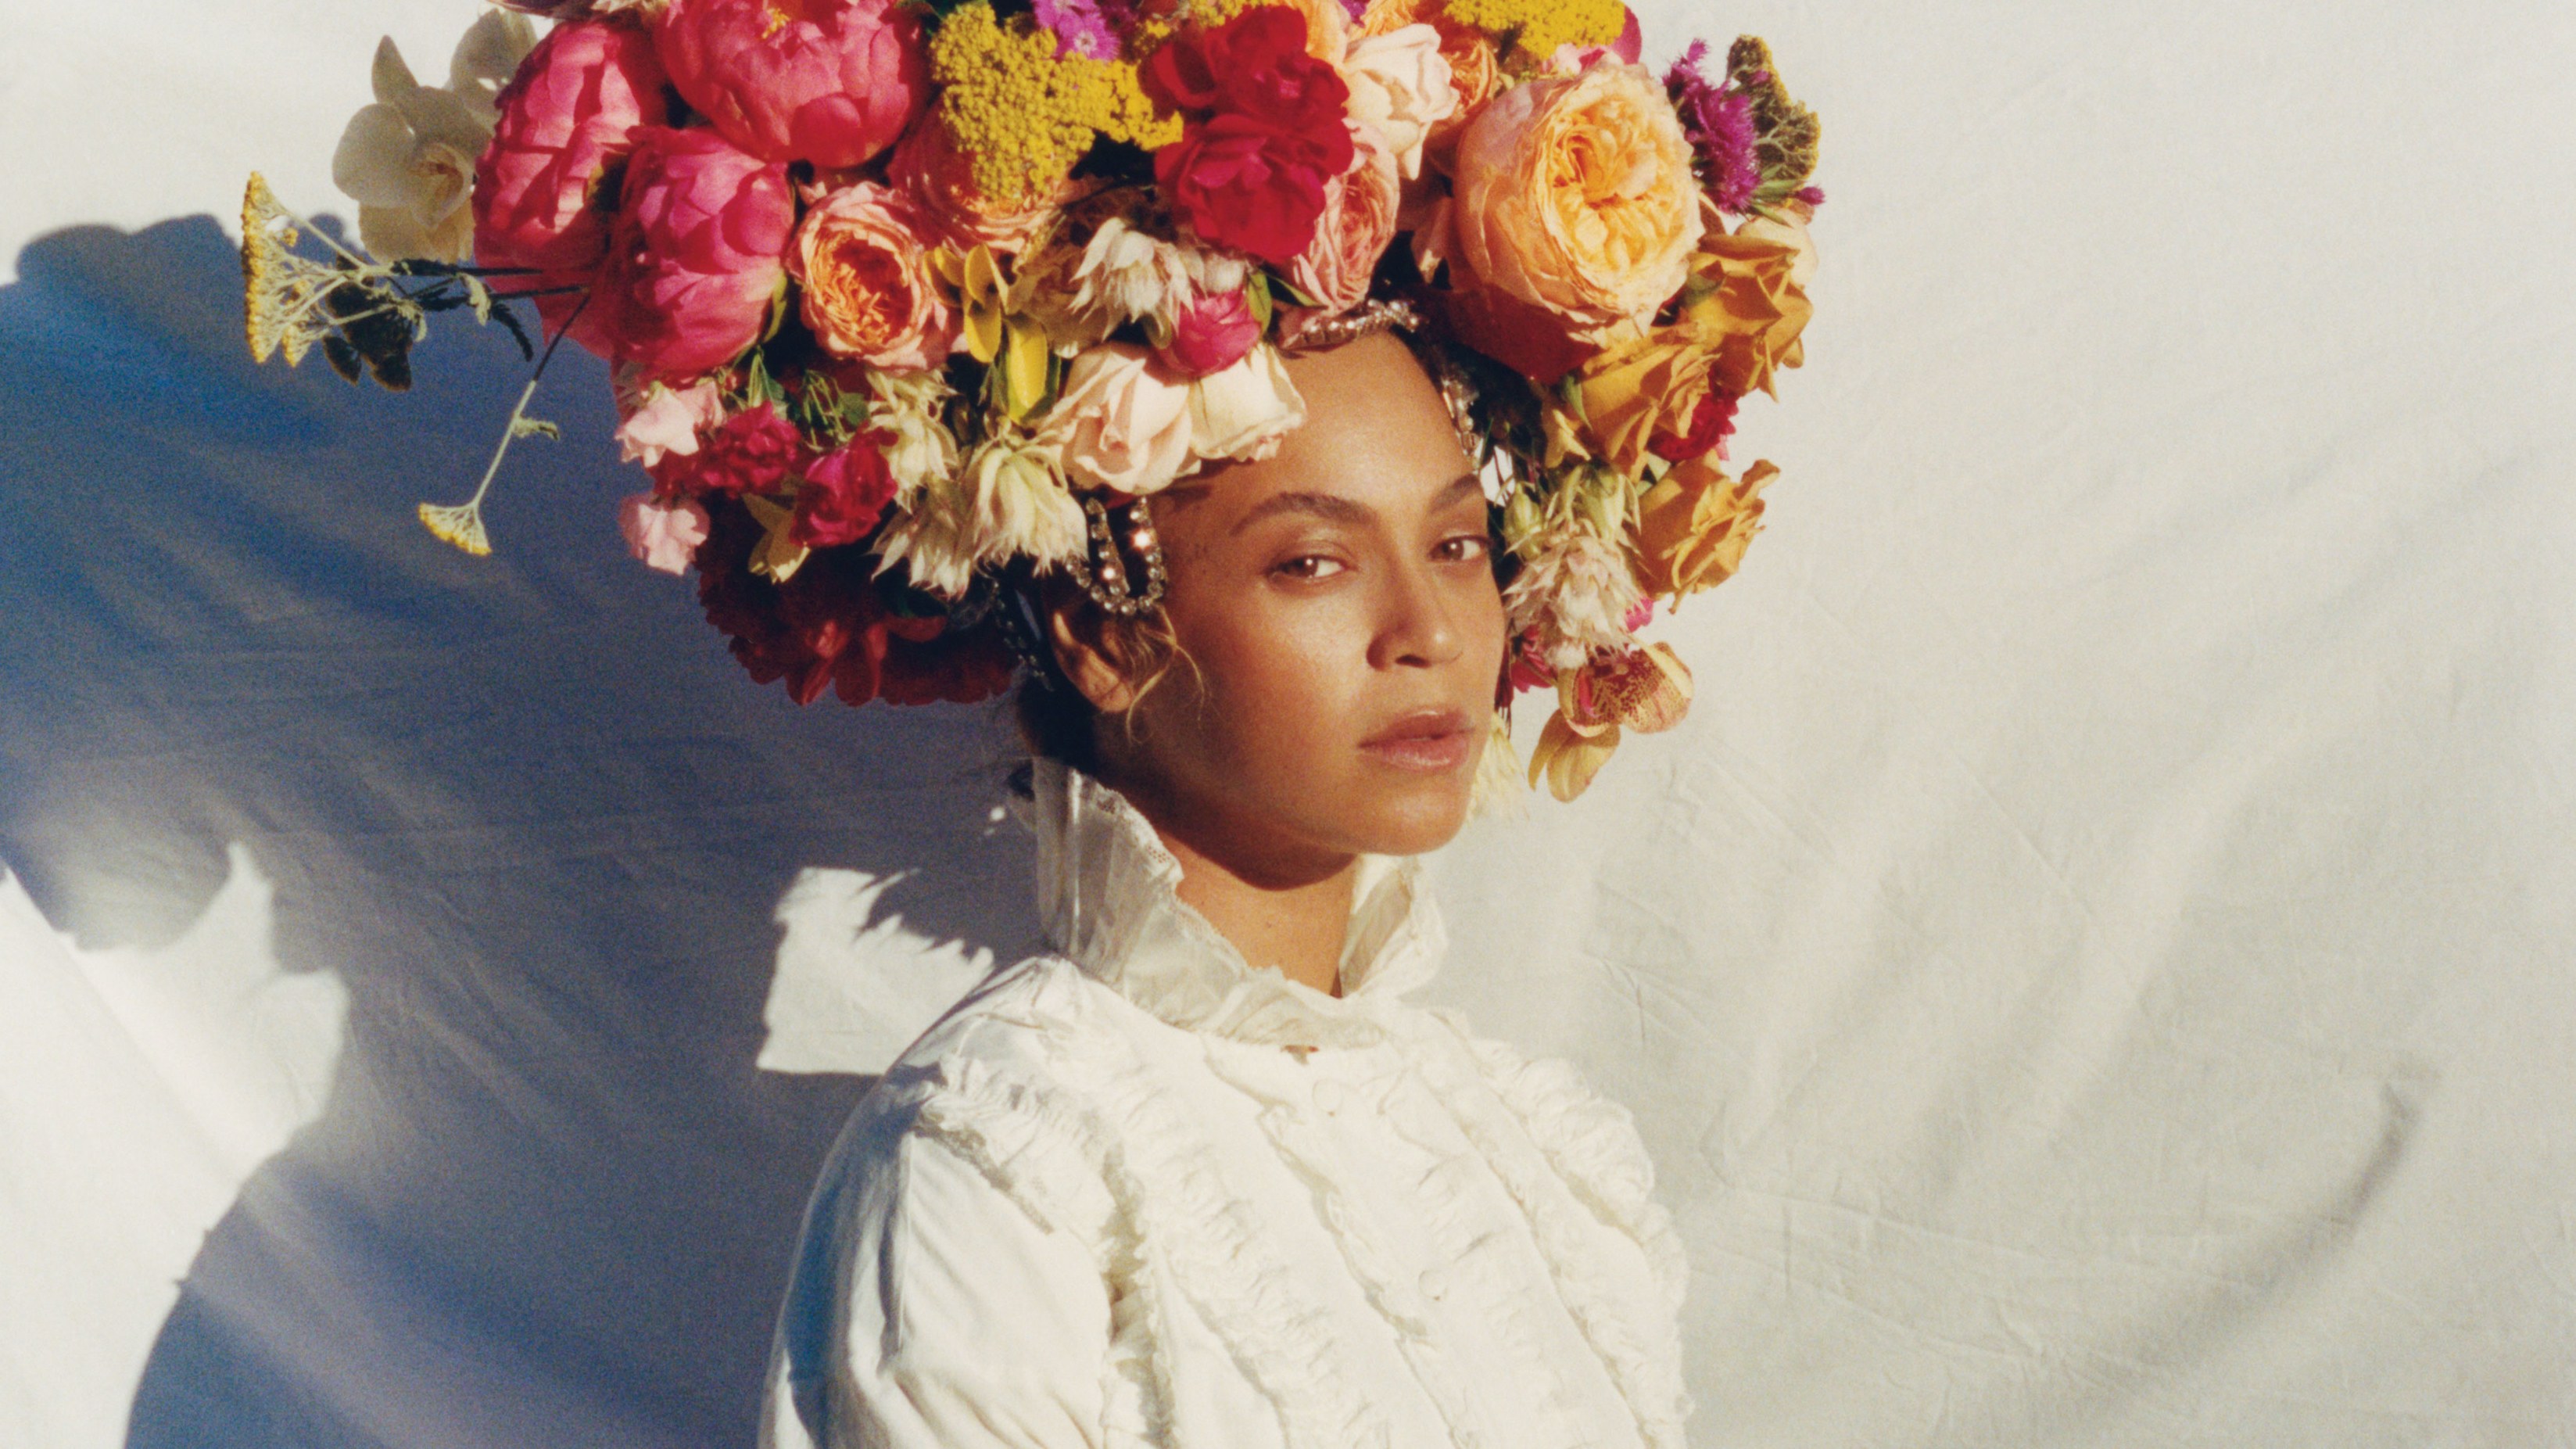 Behind The Scenes of Beyoncé's September Vogue Cover